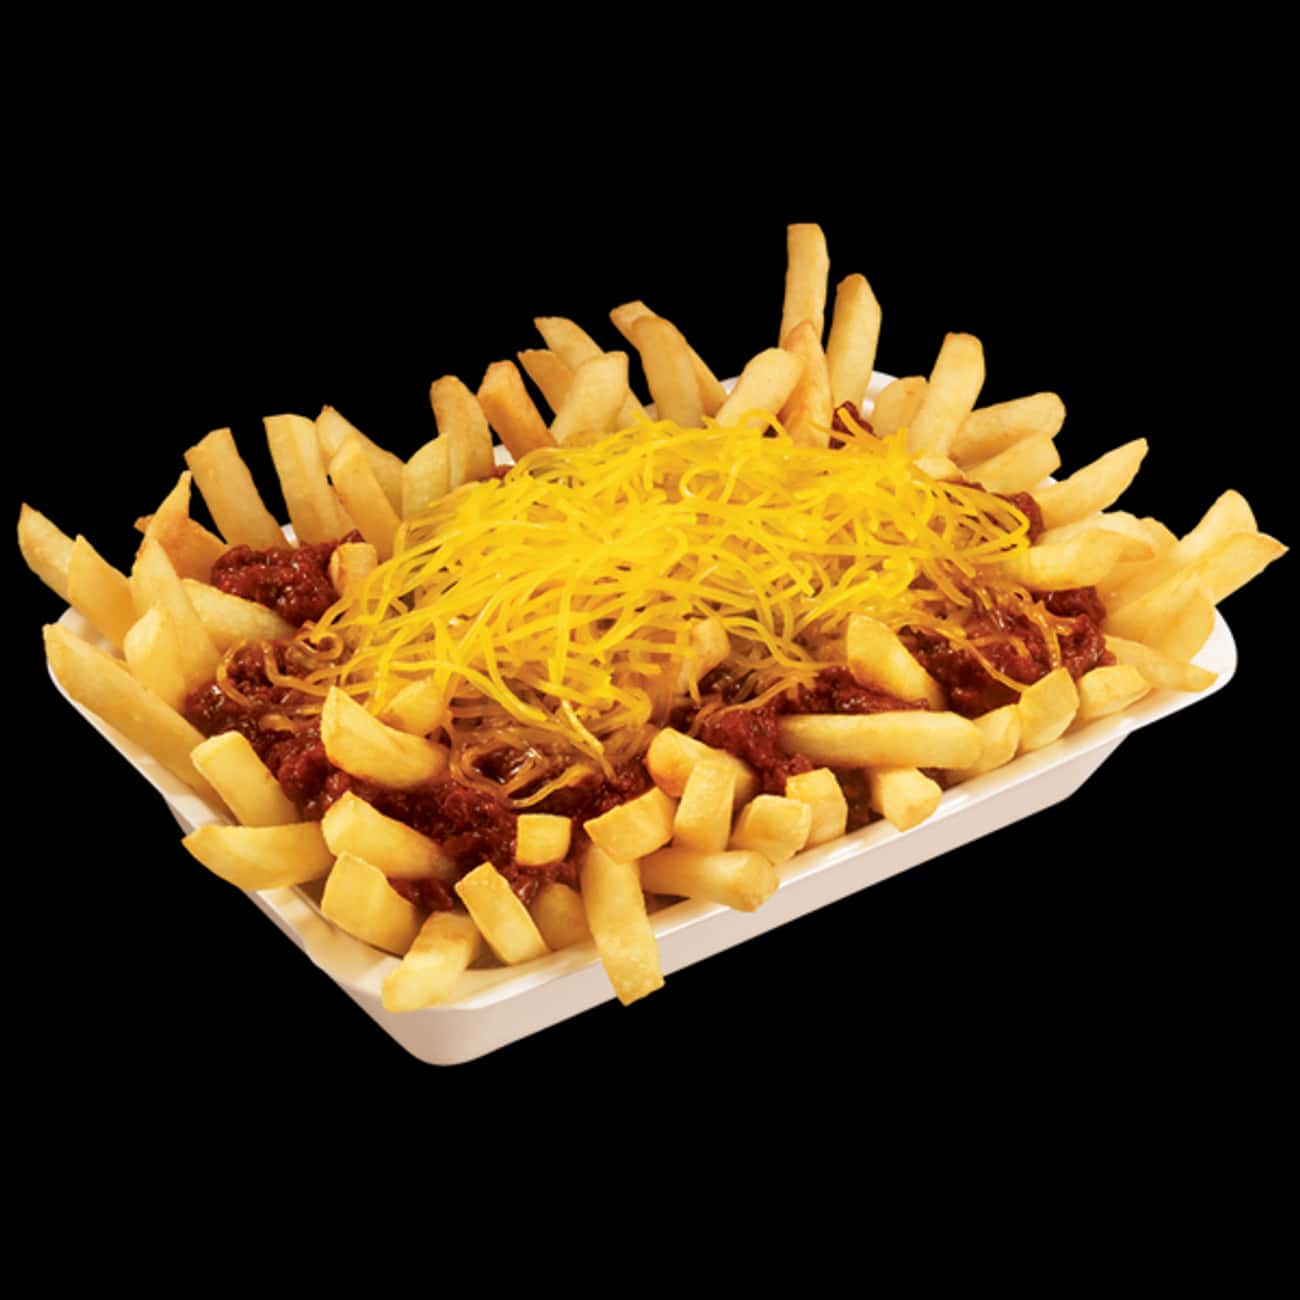 The Best Loaded Fries at Fast Food Restaurants